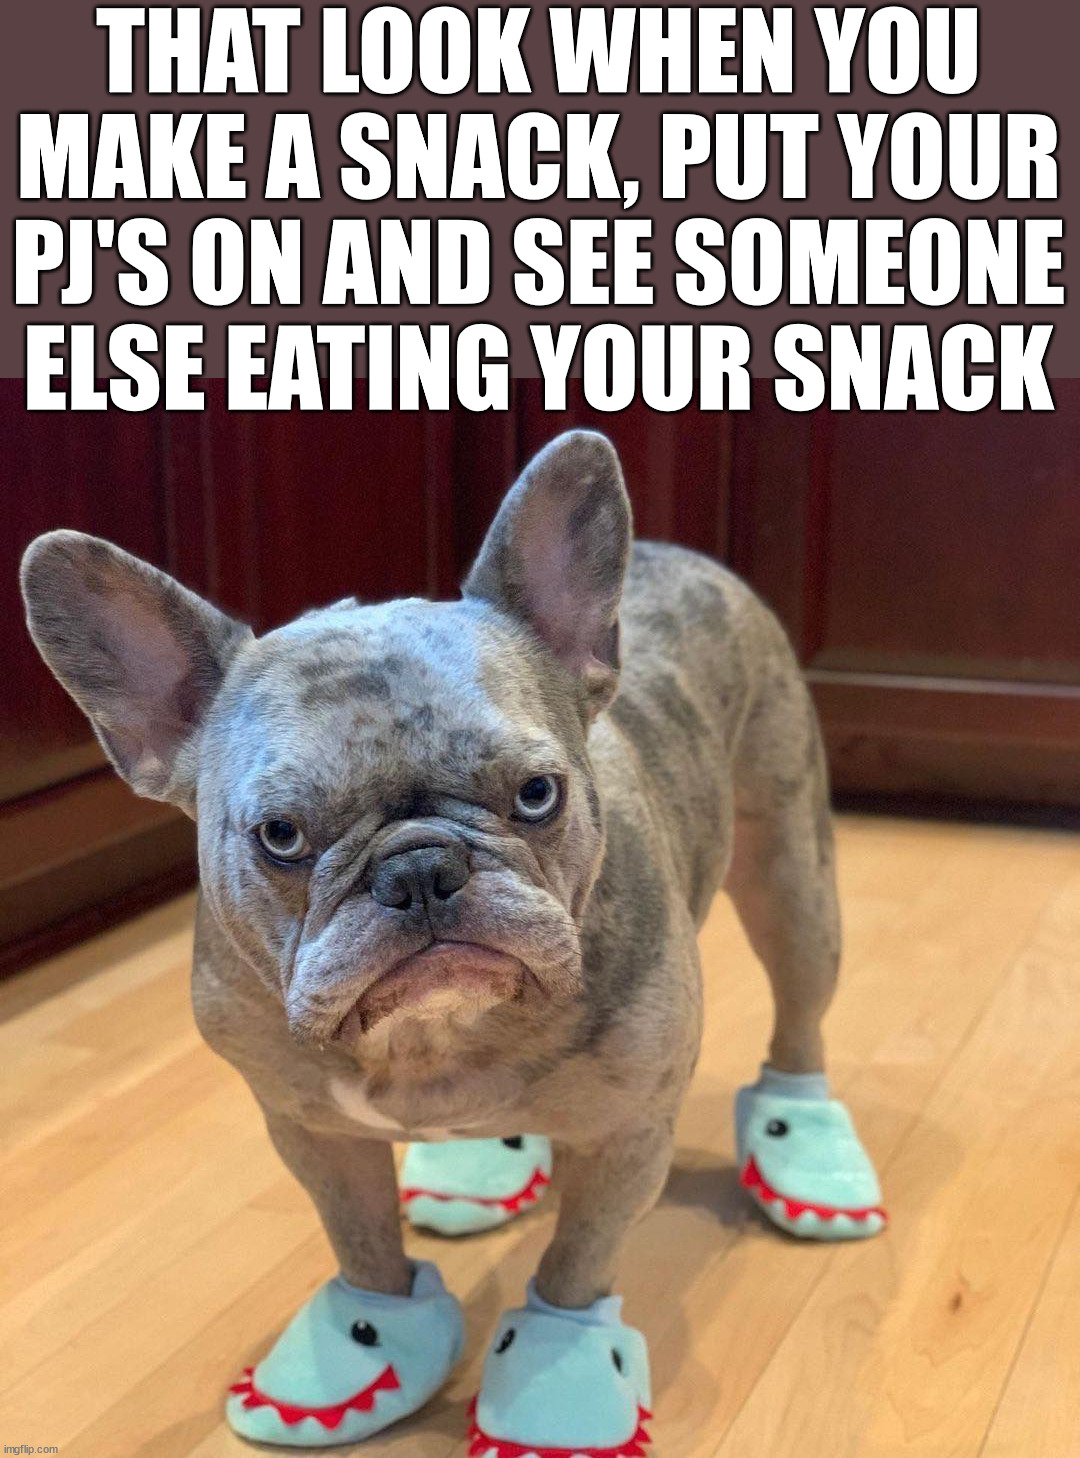 THAT LOOK WHEN YOU MAKE A SNACK, PUT YOUR PJ'S ON AND SEE SOMEONE ELSE EATING YOUR SNACK | image tagged in snacks | made w/ Imgflip meme maker